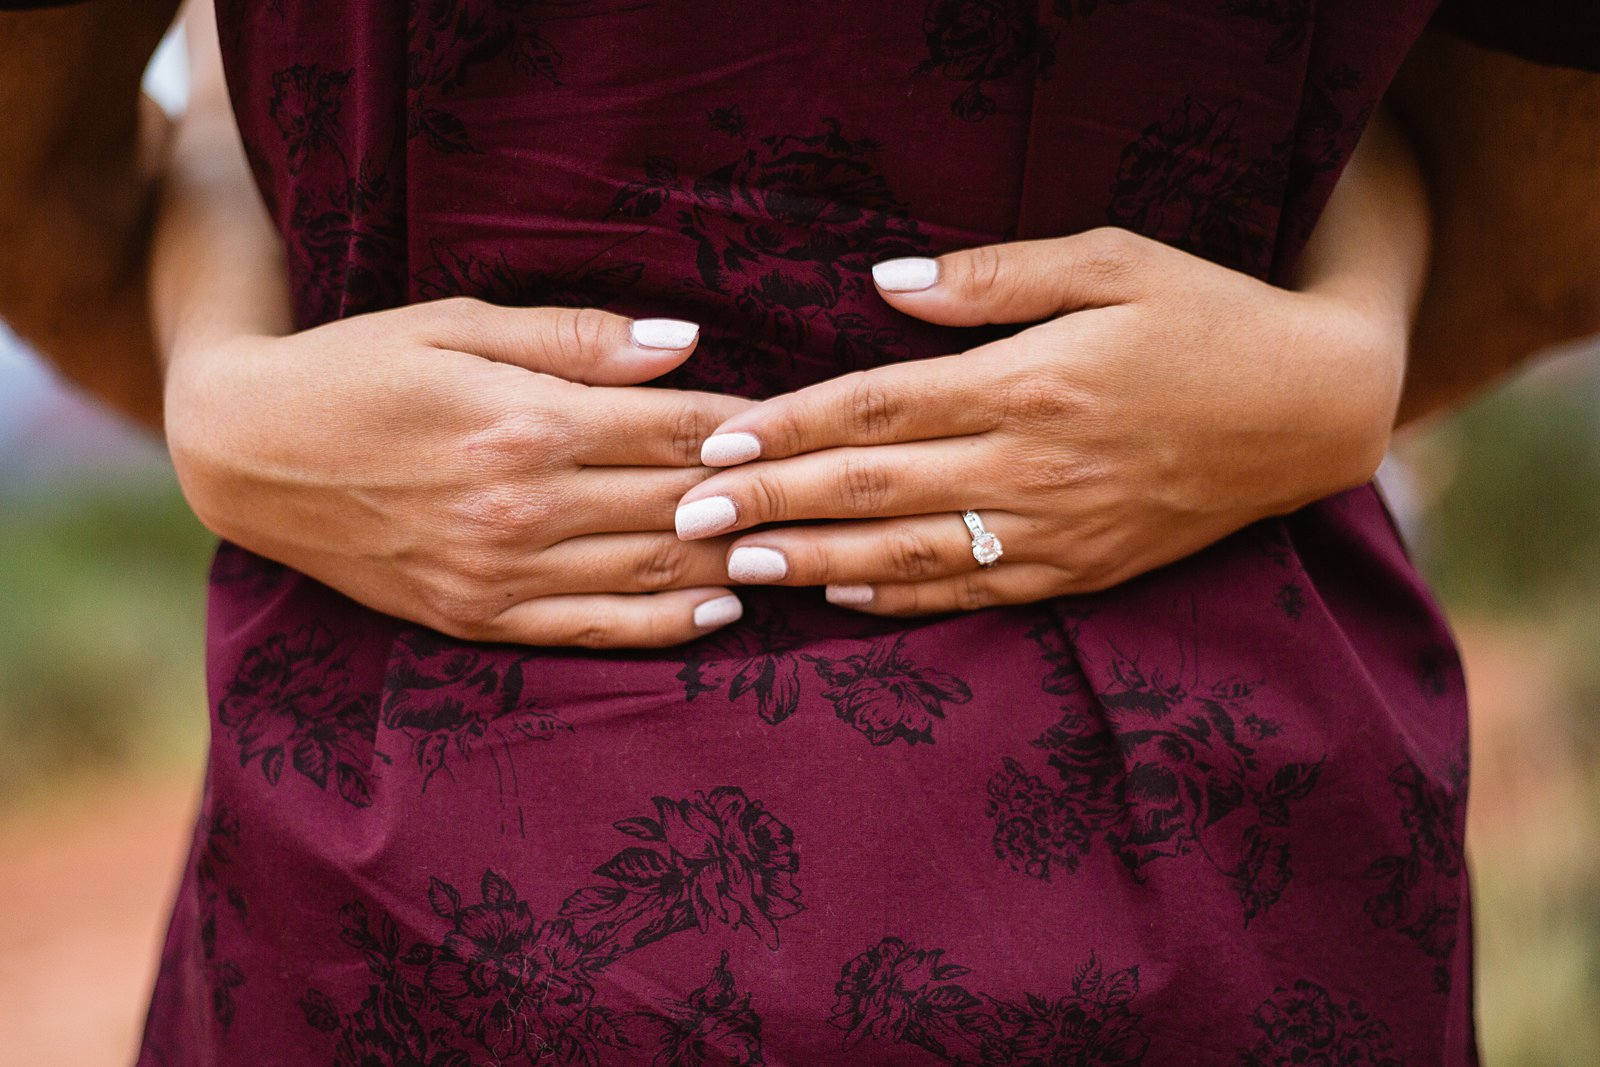 Detail image of engagement ring during an engagement session by PMA Photography.